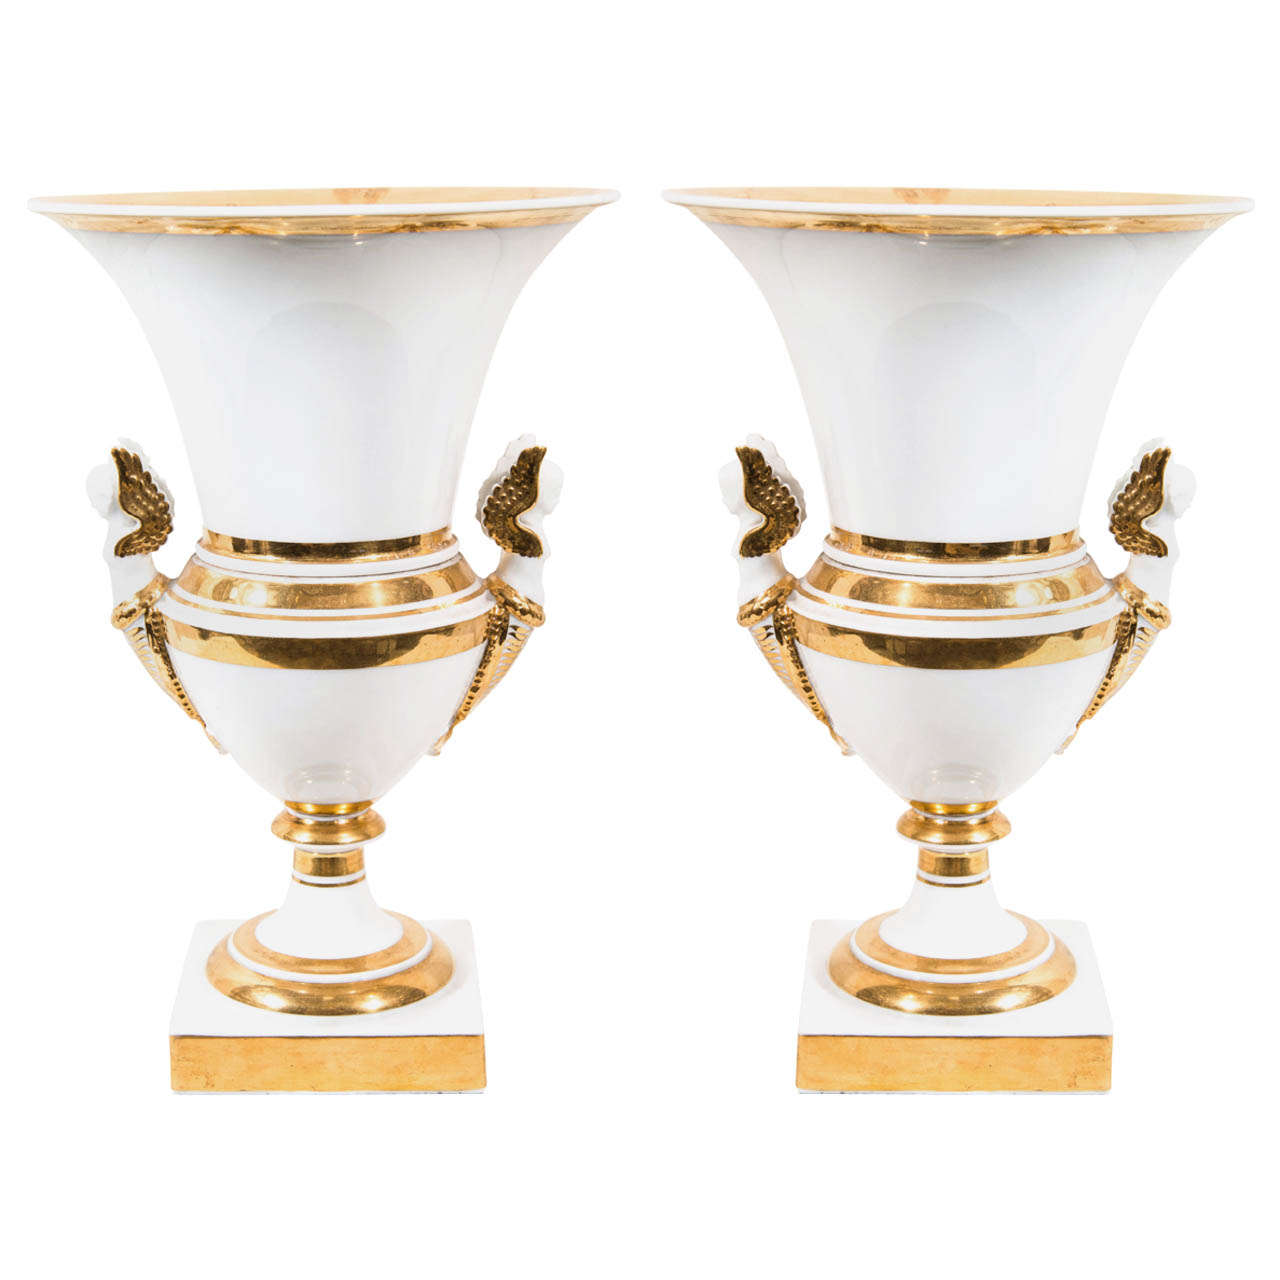 Pair of French porcelain vases, ca. 1850
